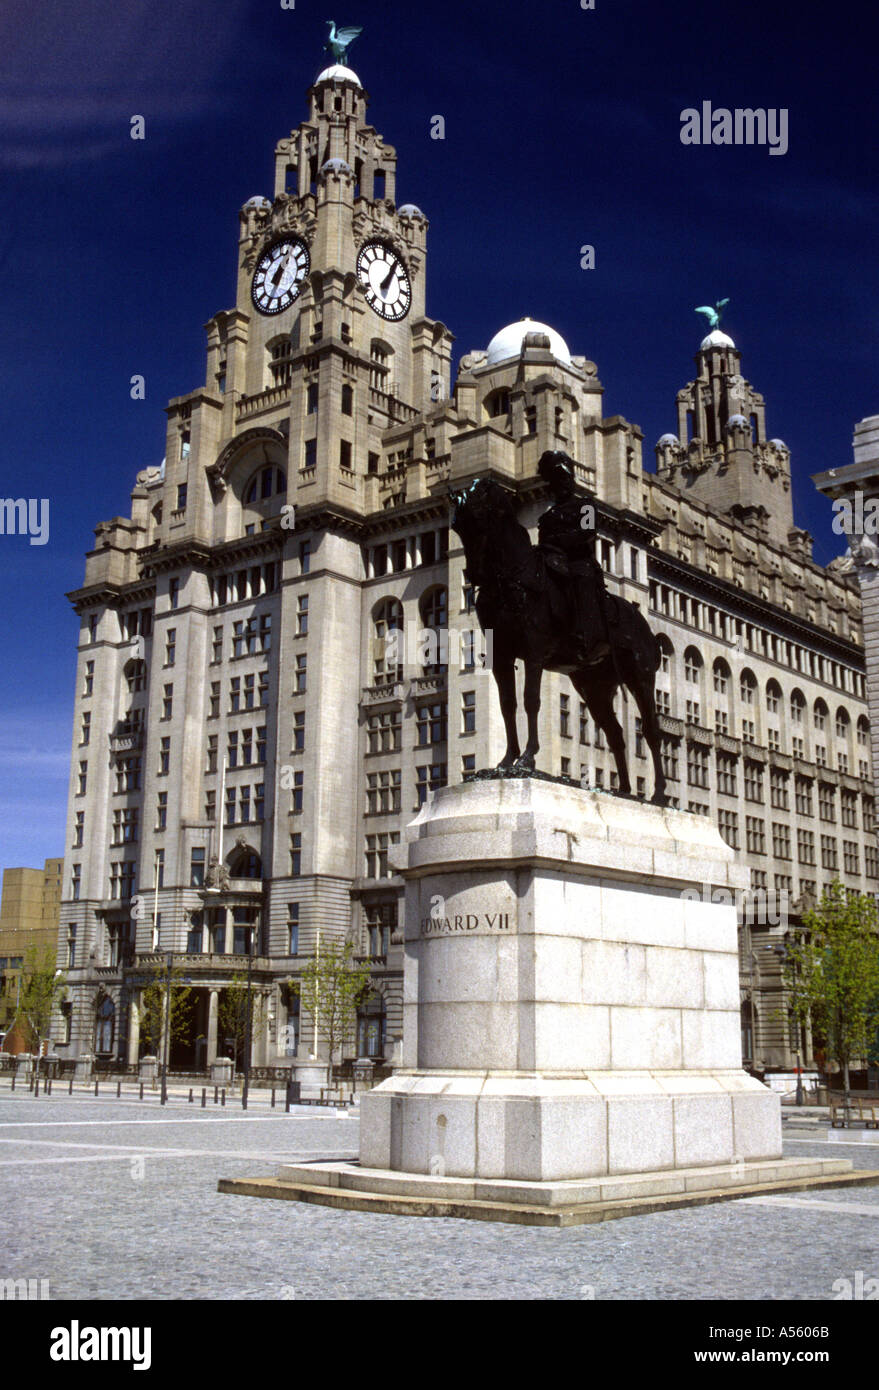 Liver Building Statue of King Edward 7th Pier Head Liverpool Merseyside England UK Europe Stock Photo